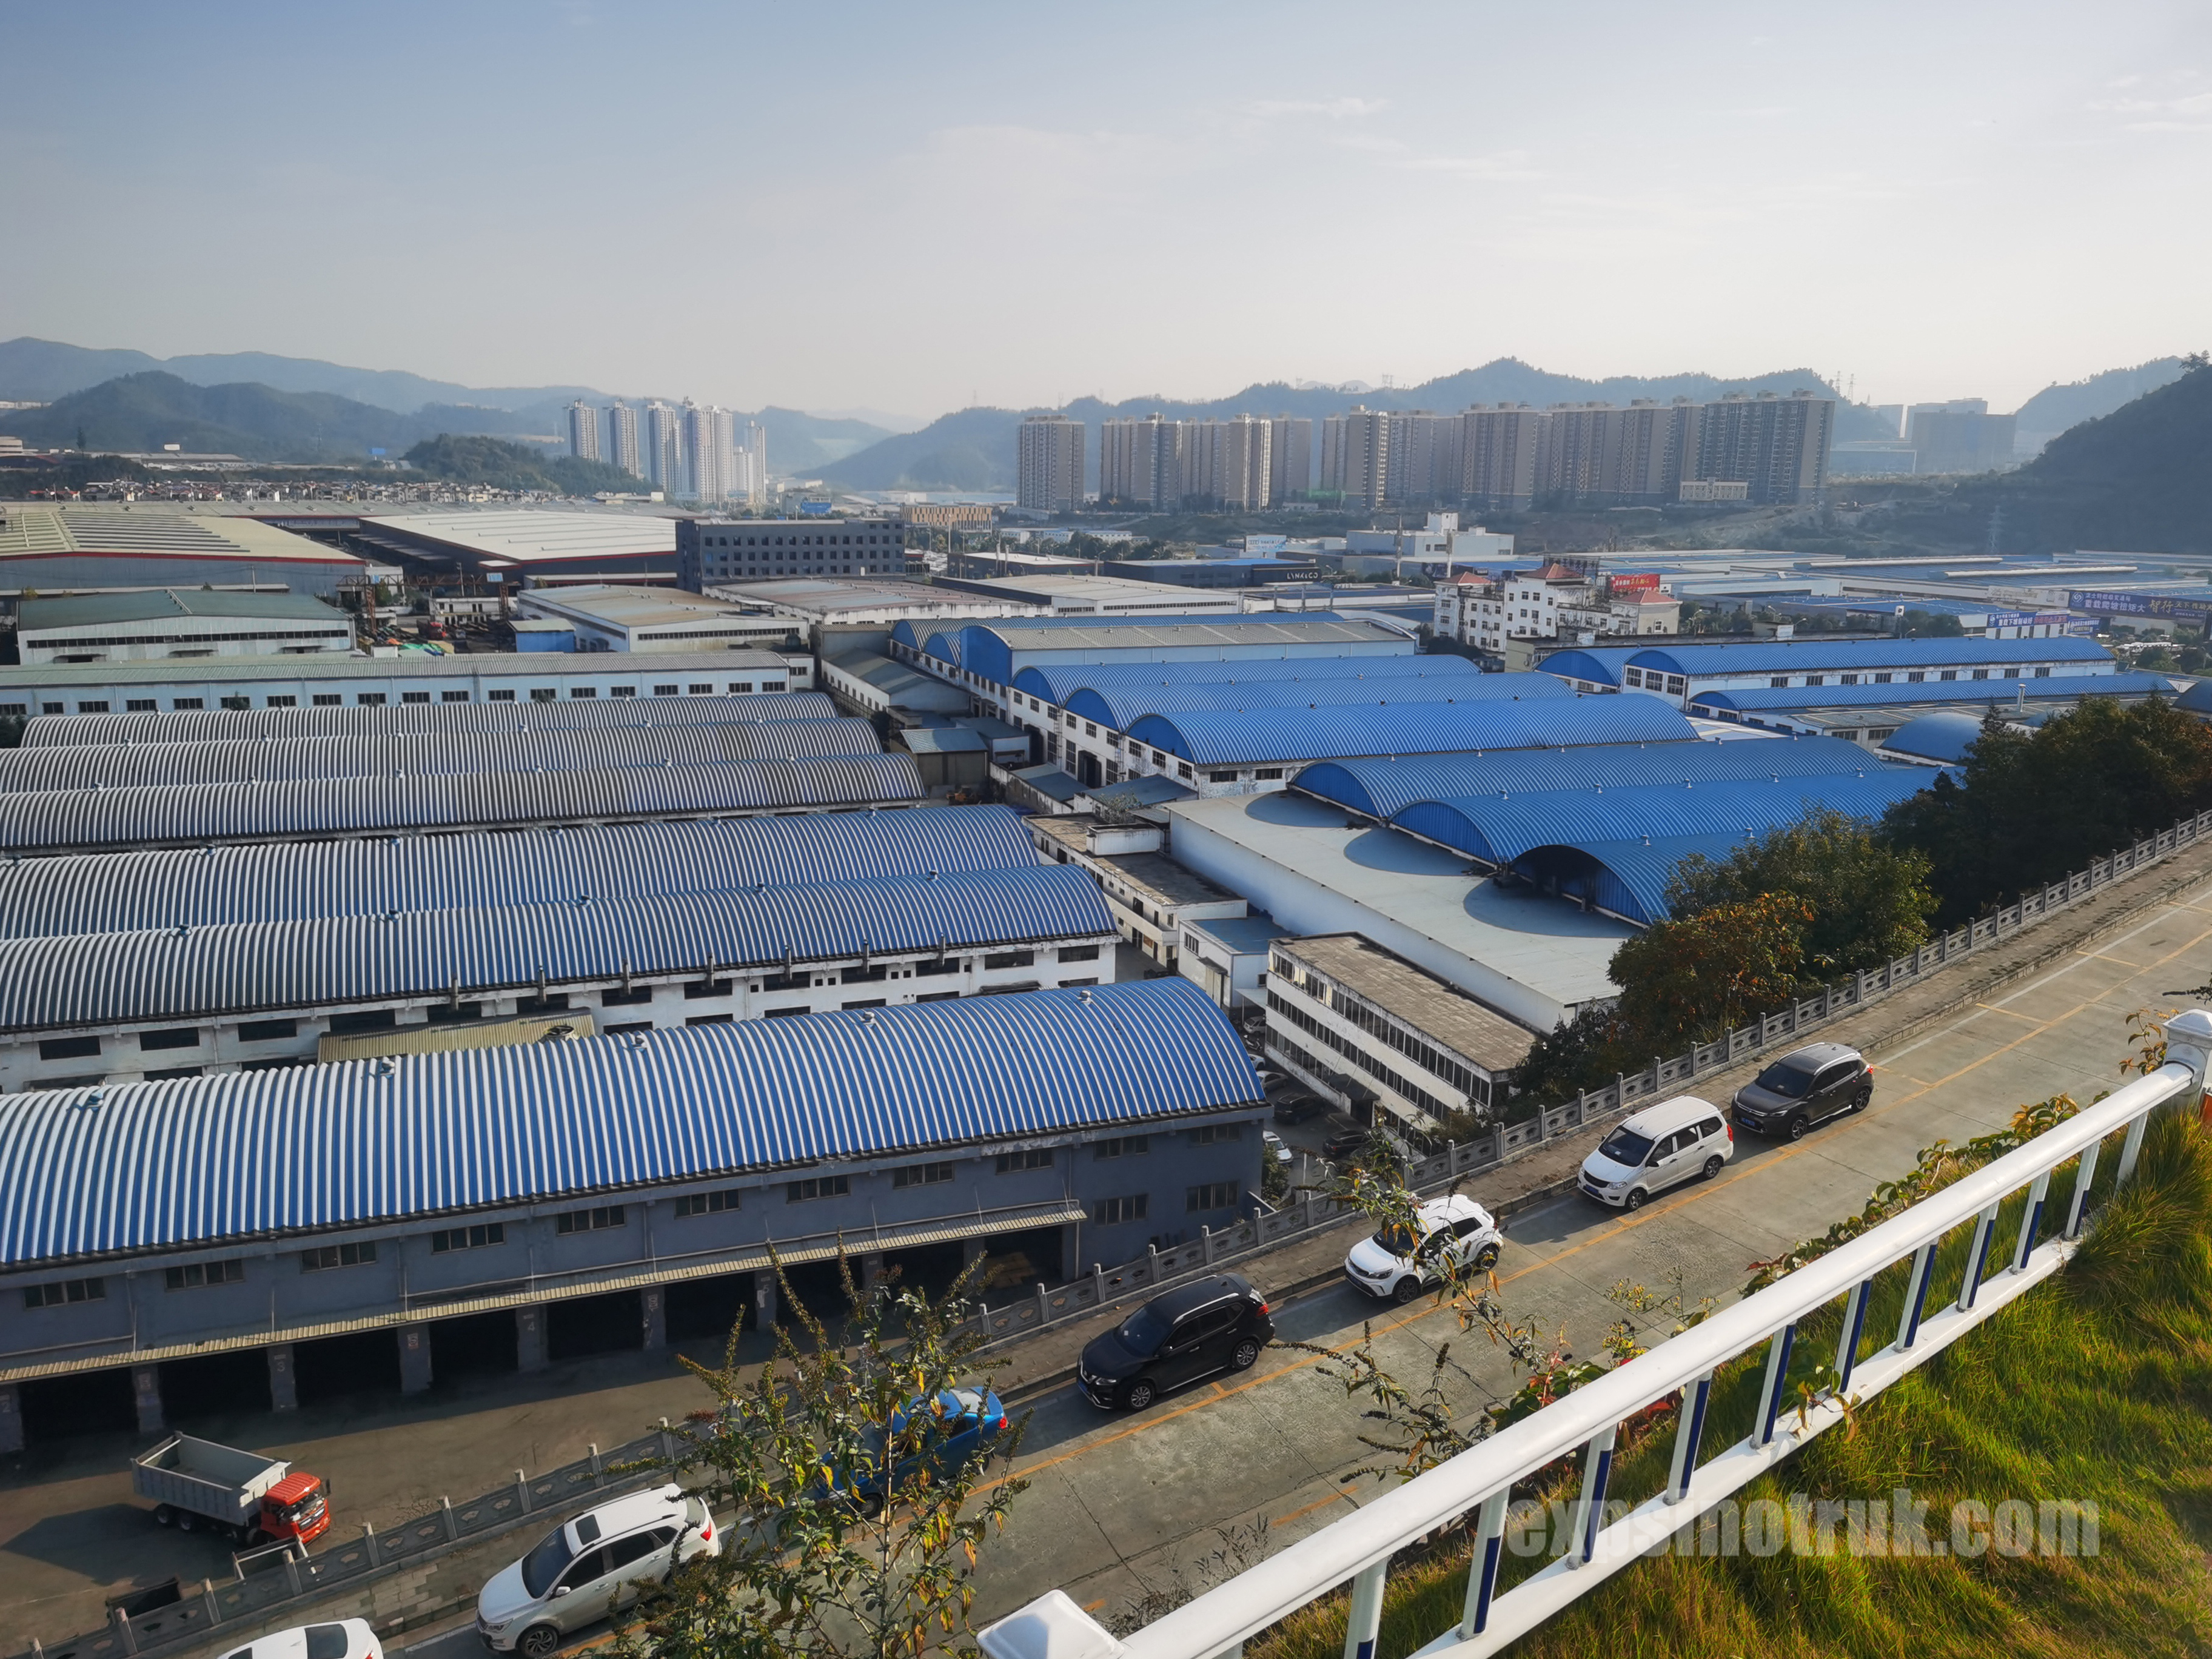 The Most Popular Trailer Factory In China